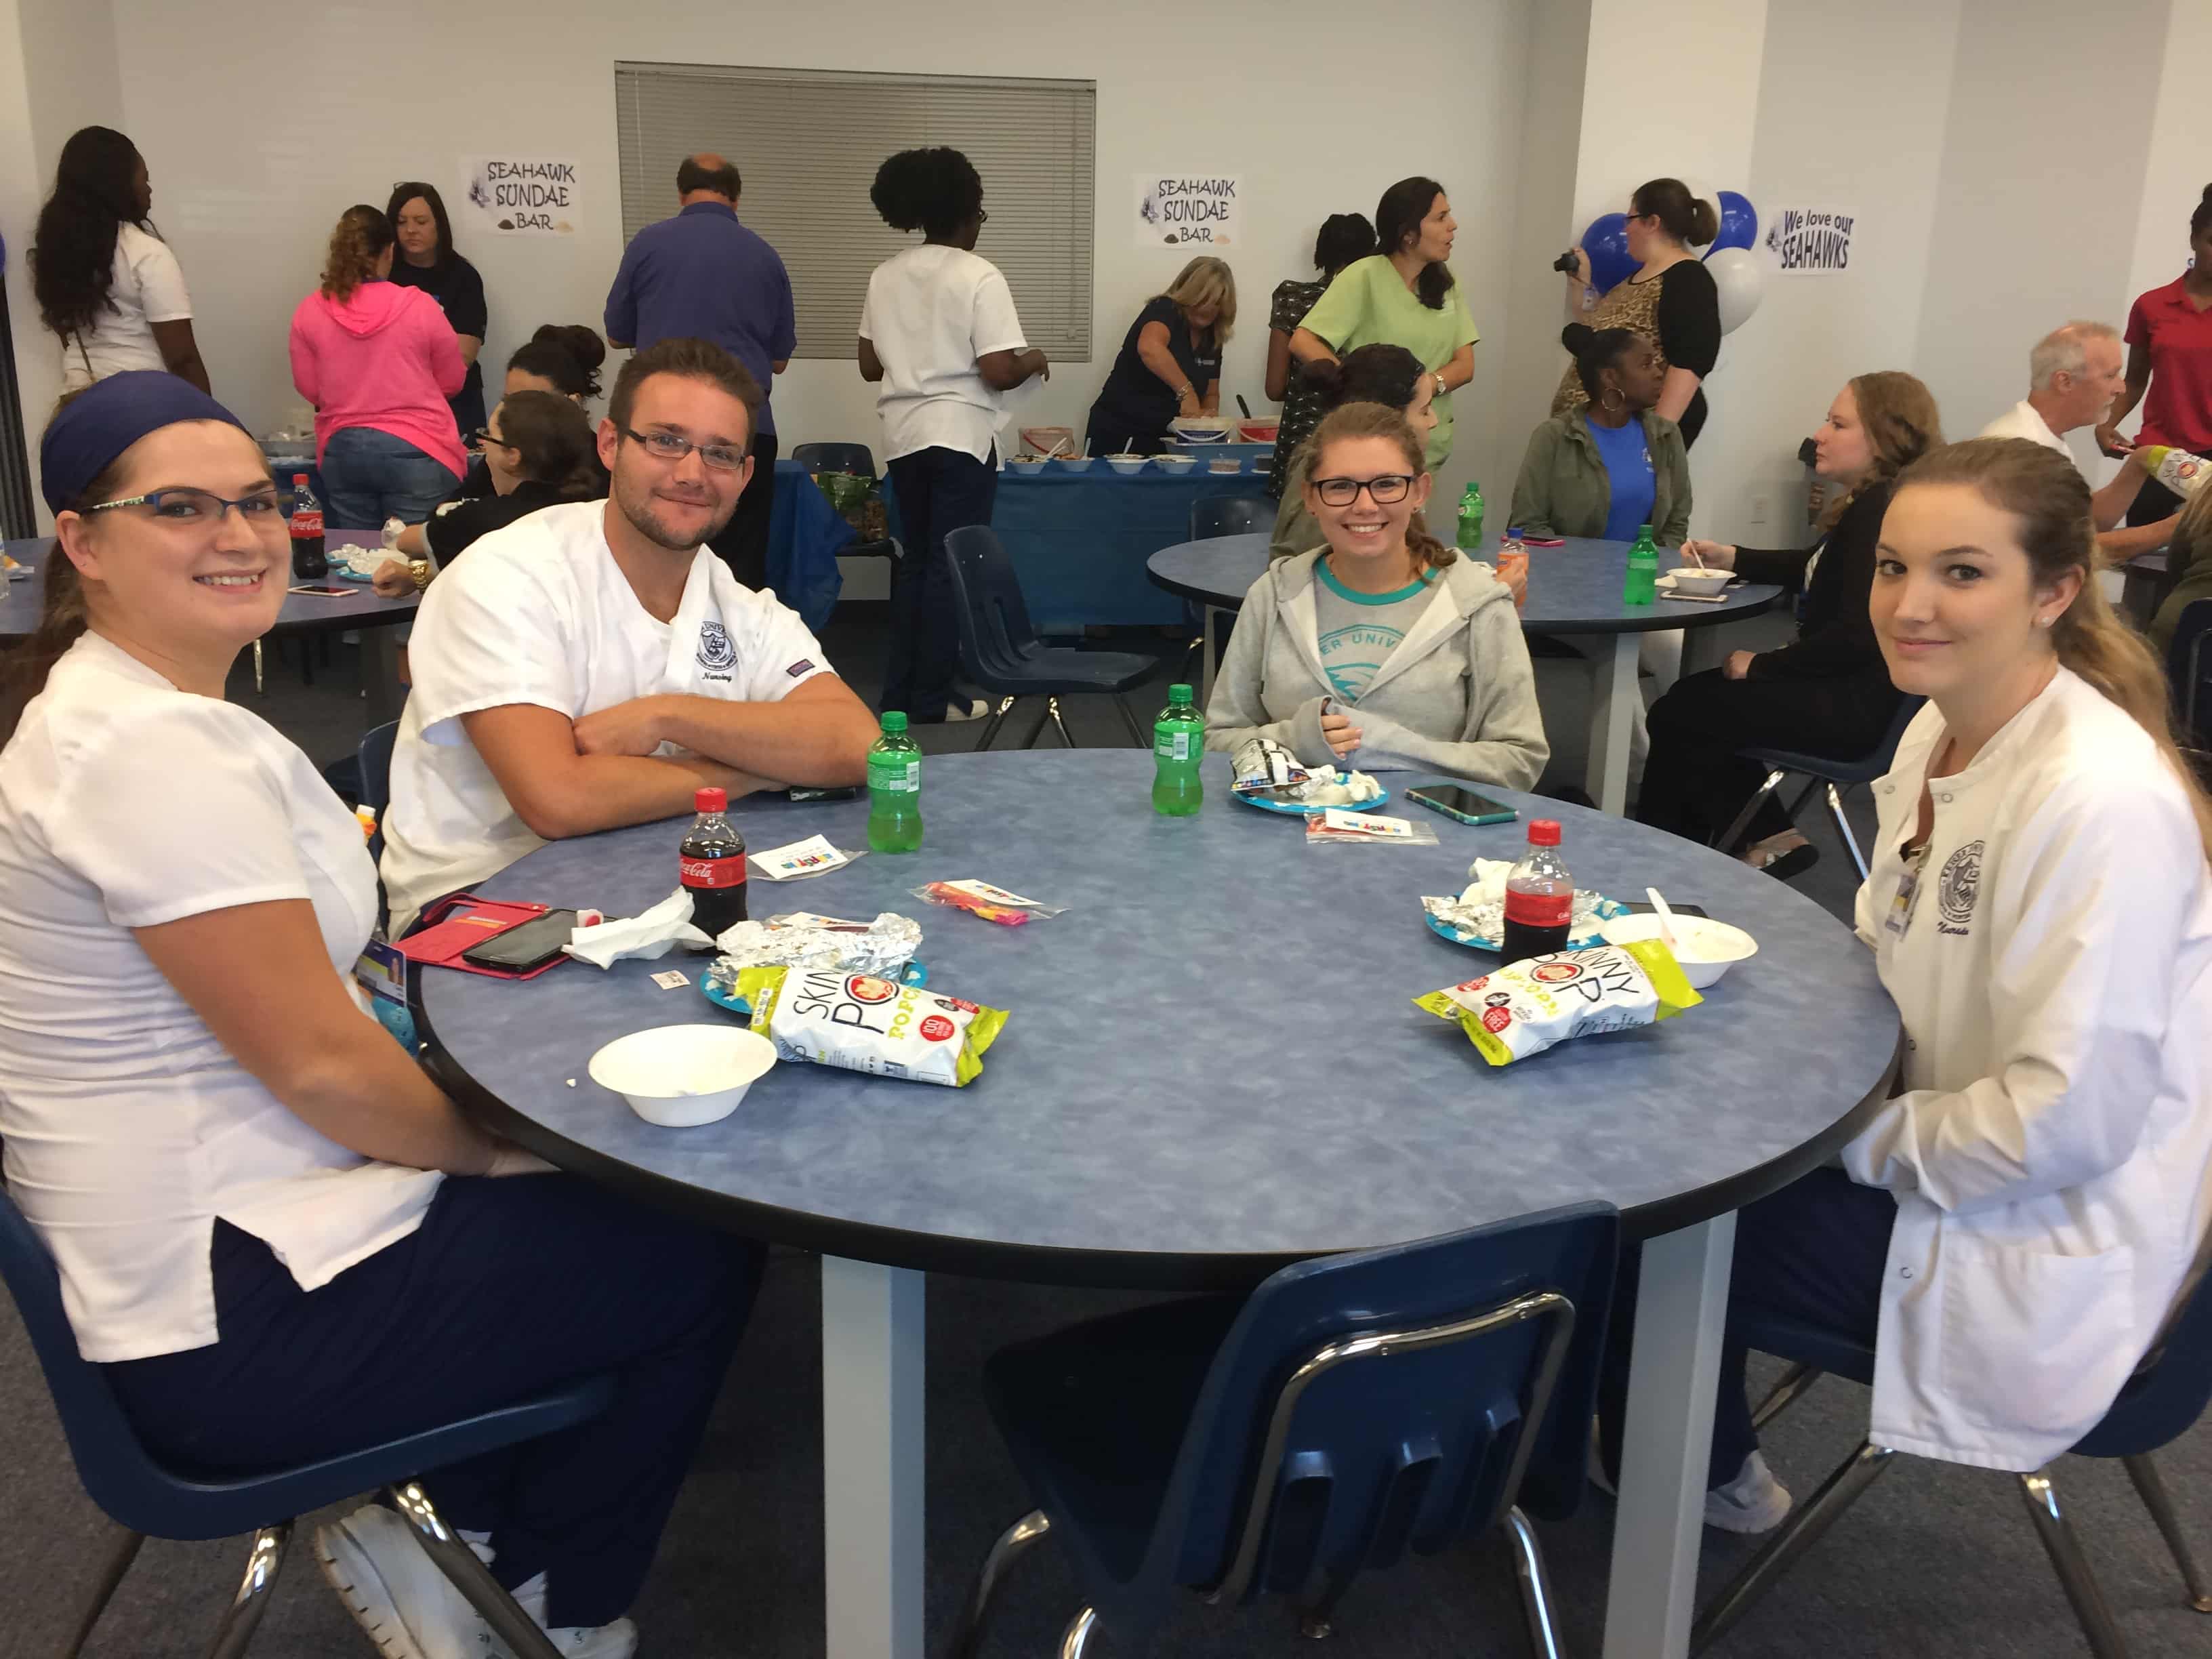 Port St. Lucie Shows off Seahawk Spirit at Student Appreciation Event